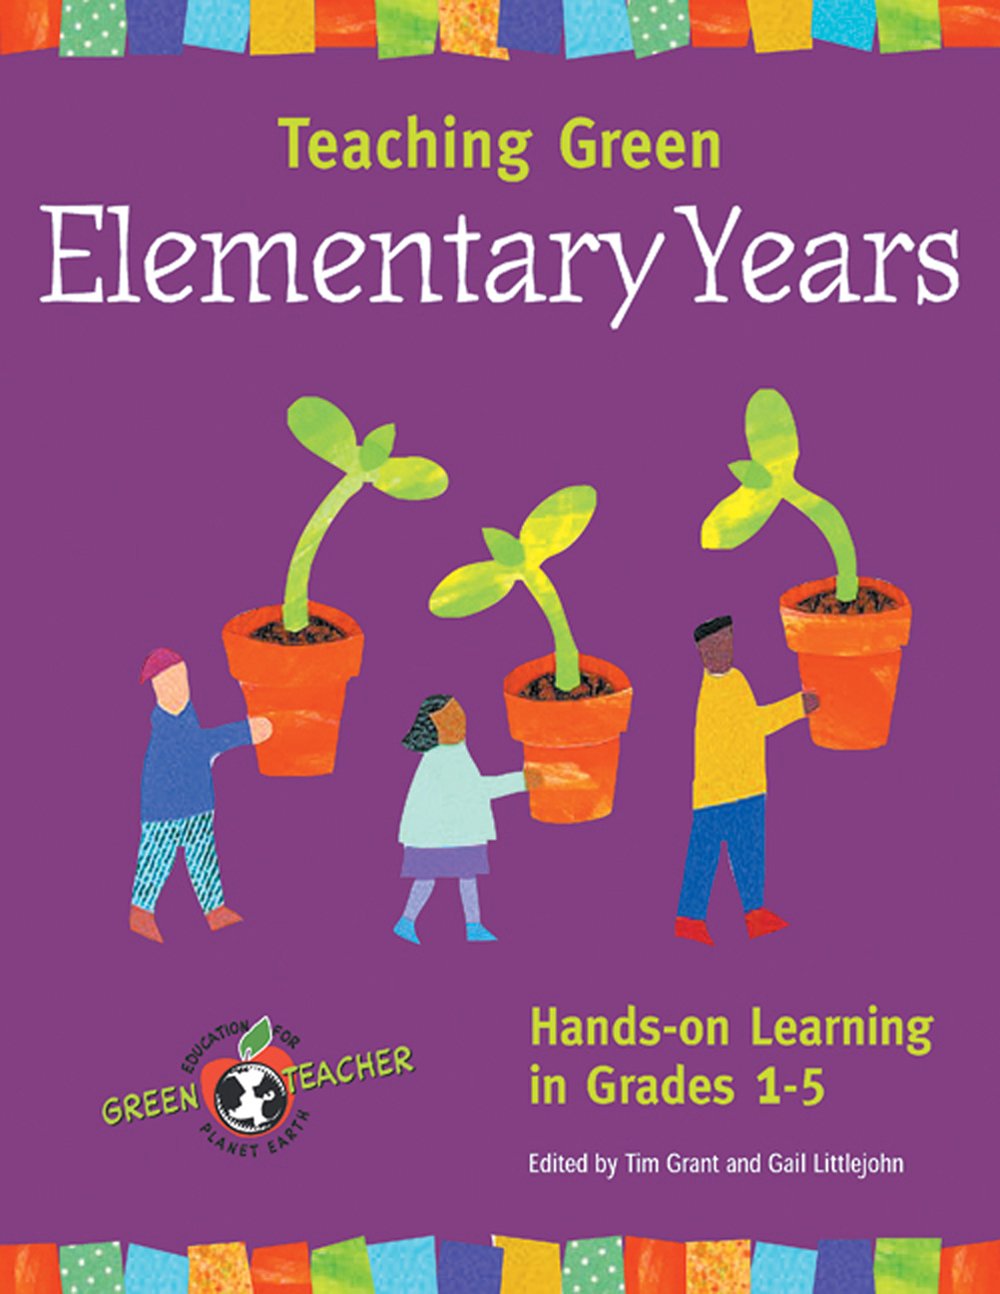 Teaching Green: The Elementary Years, Hands-On Learning in Grade K-5